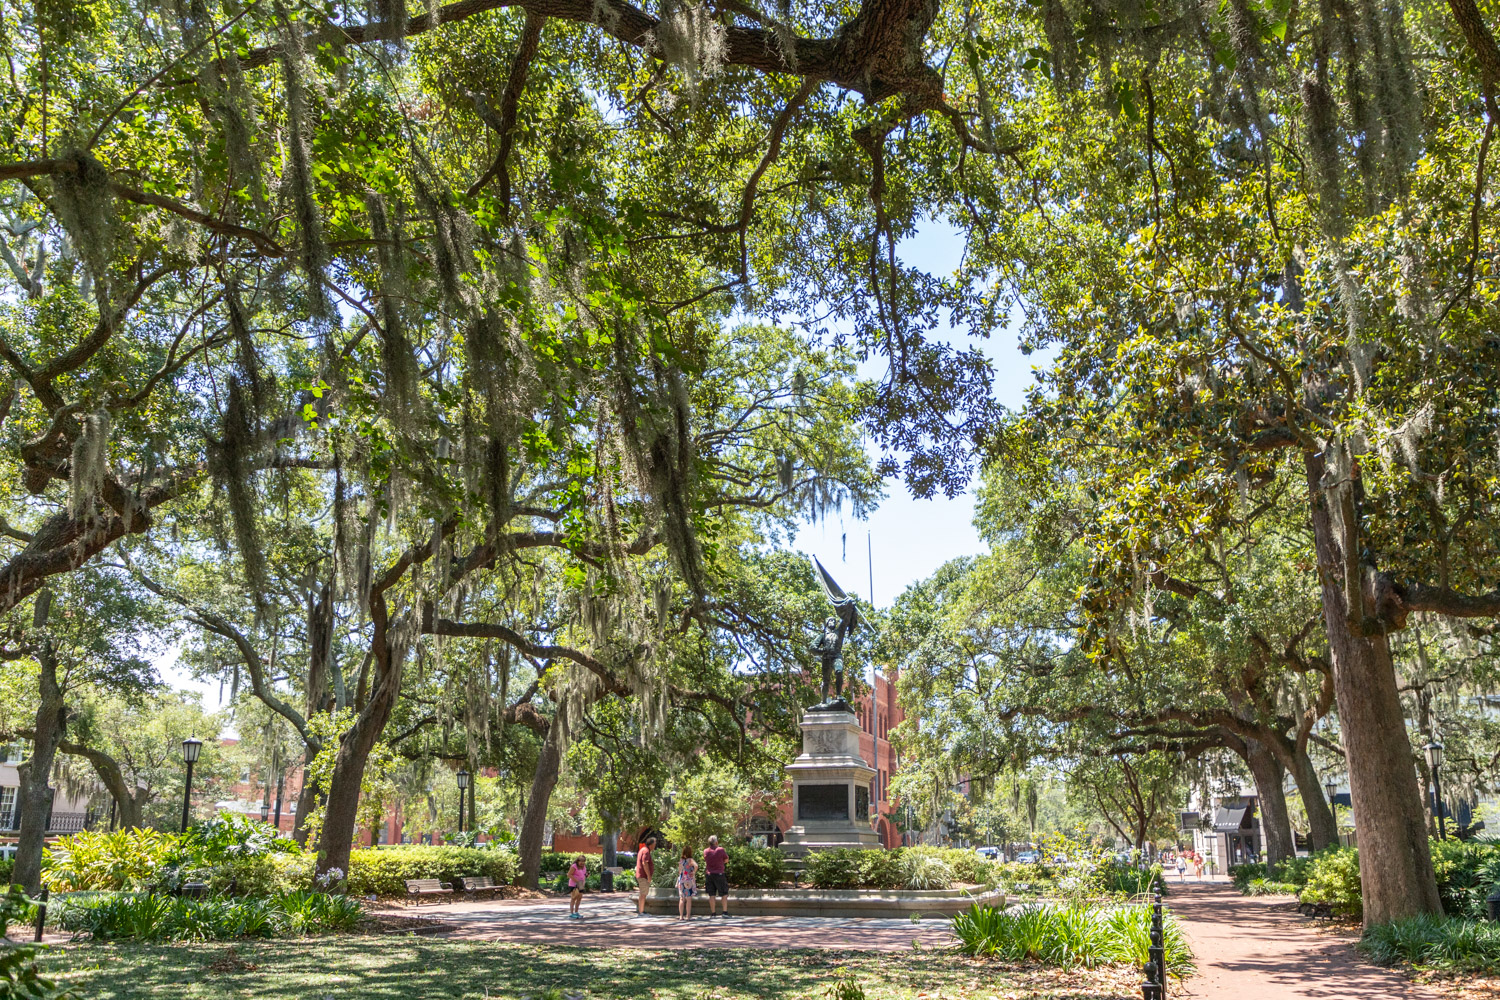 Why Savannah is our favorite city in the United States